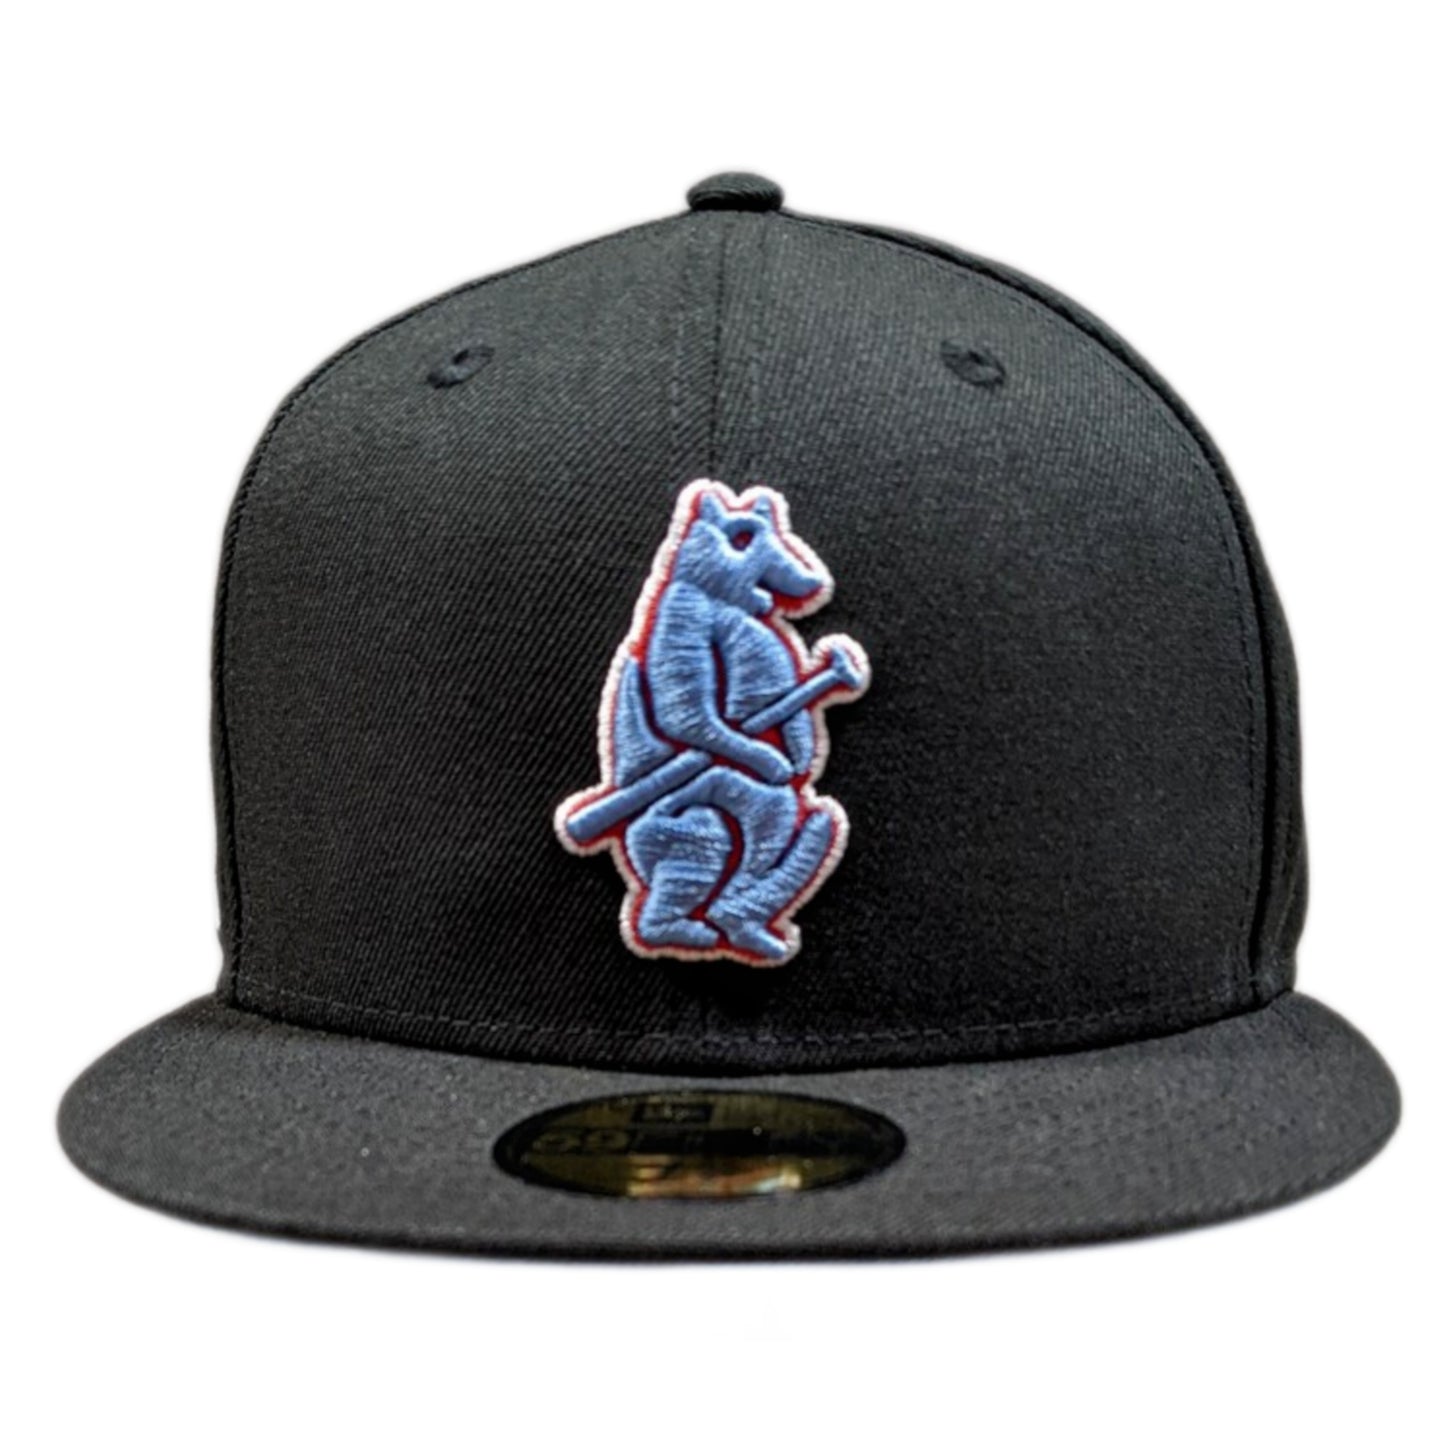 Chicago Cubs Cooperstown Collection Wrigley Field Black/ Sky Blue New Era 59FIFTY Fitted Hat